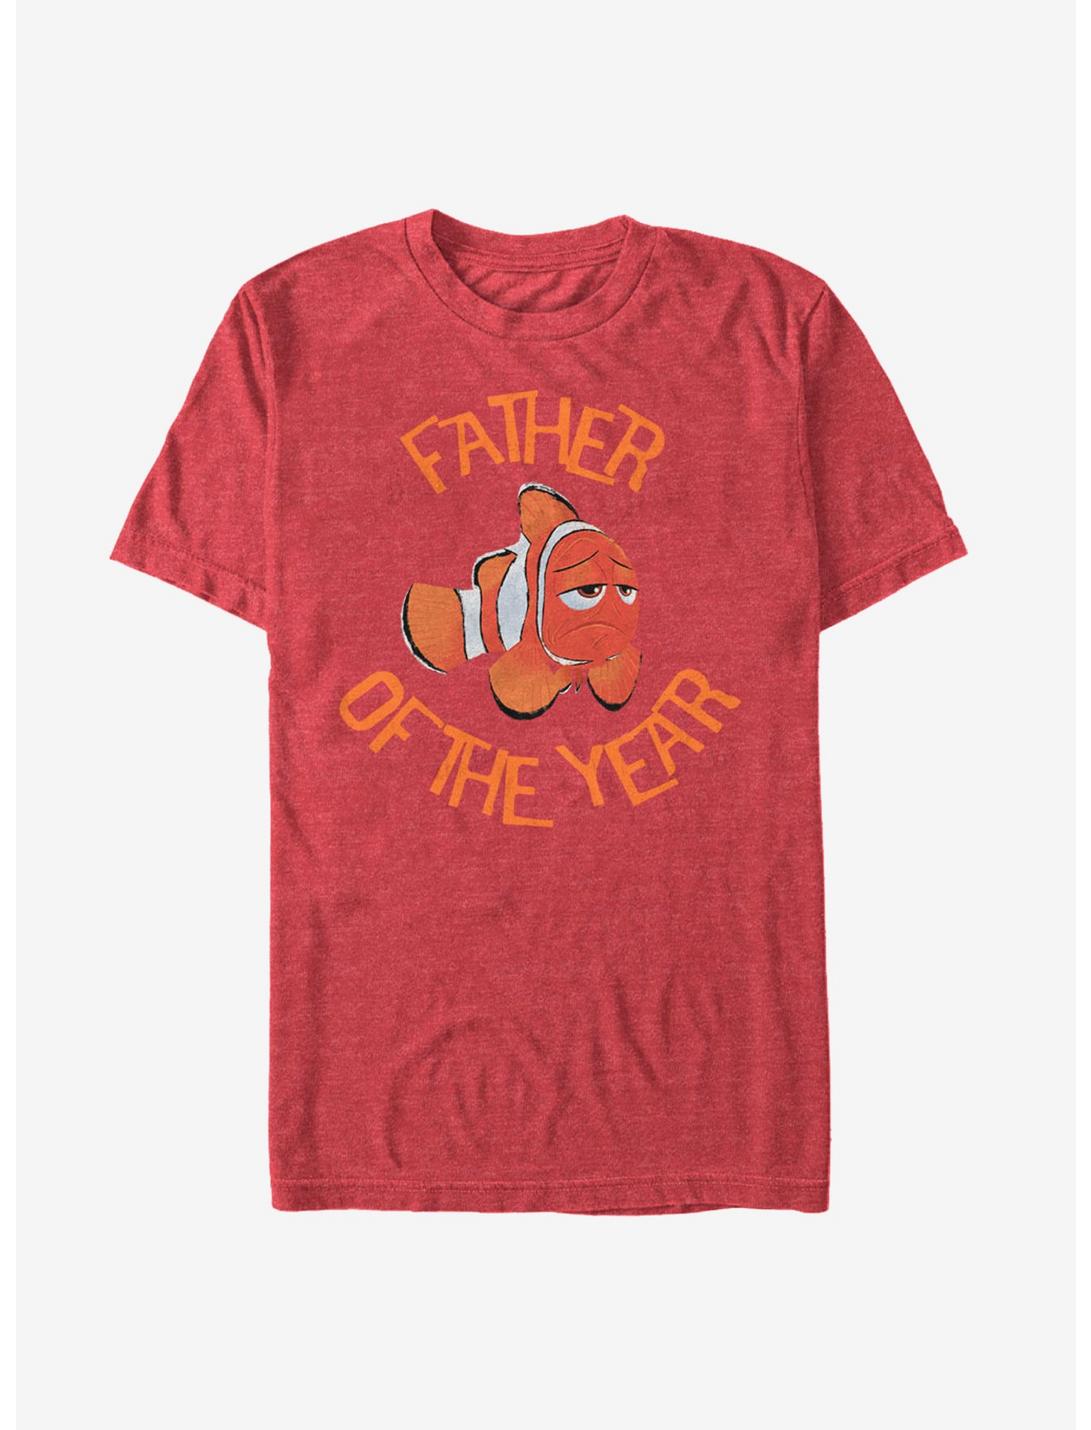 Disney Pixar Finding Dory Marlin Father of the Year T-Shirt, RED HTR, hi-res